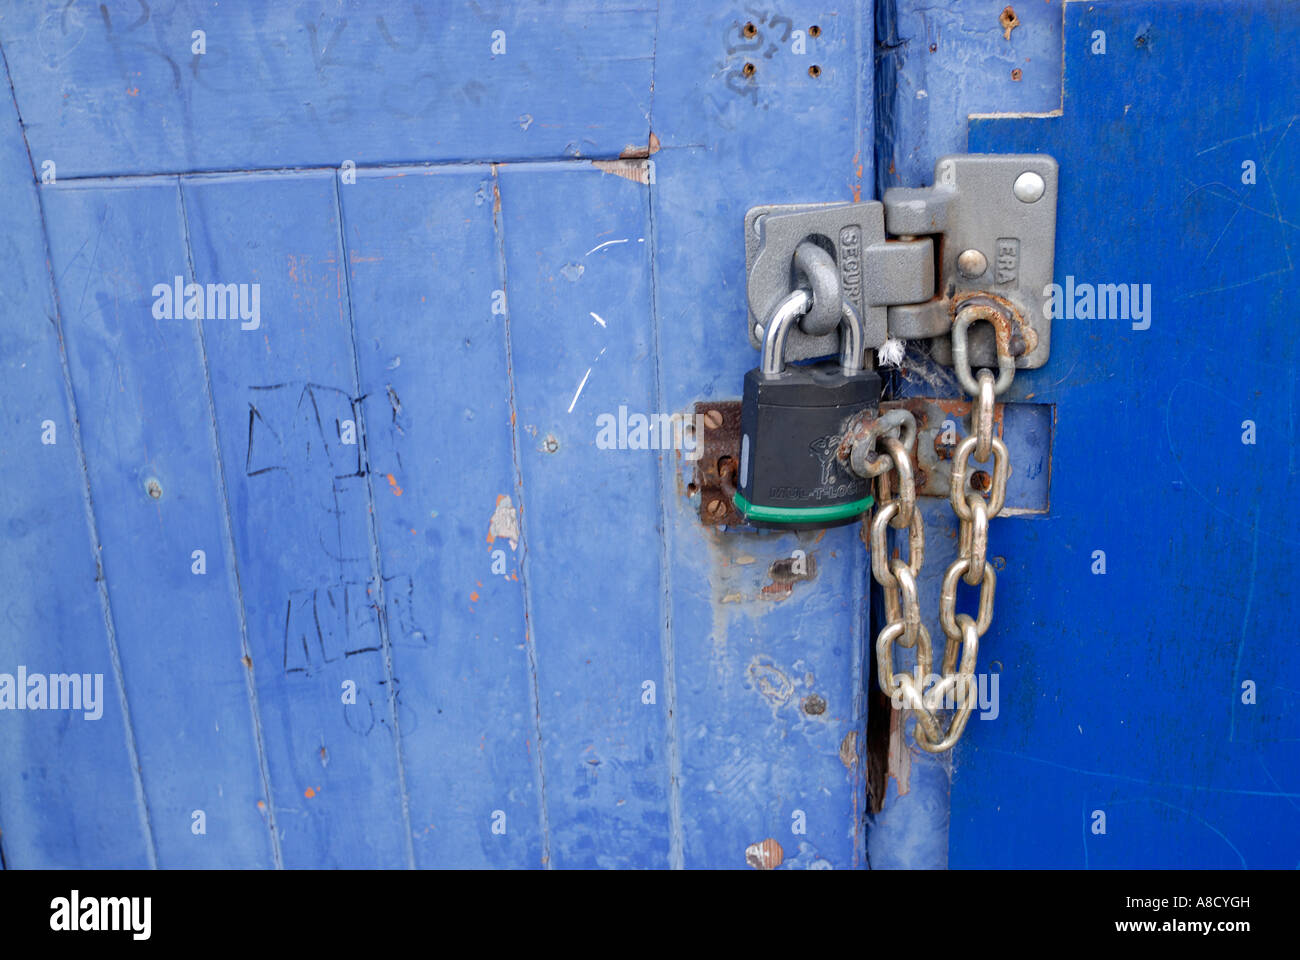 Lock and chain on blue doors Stock Photo